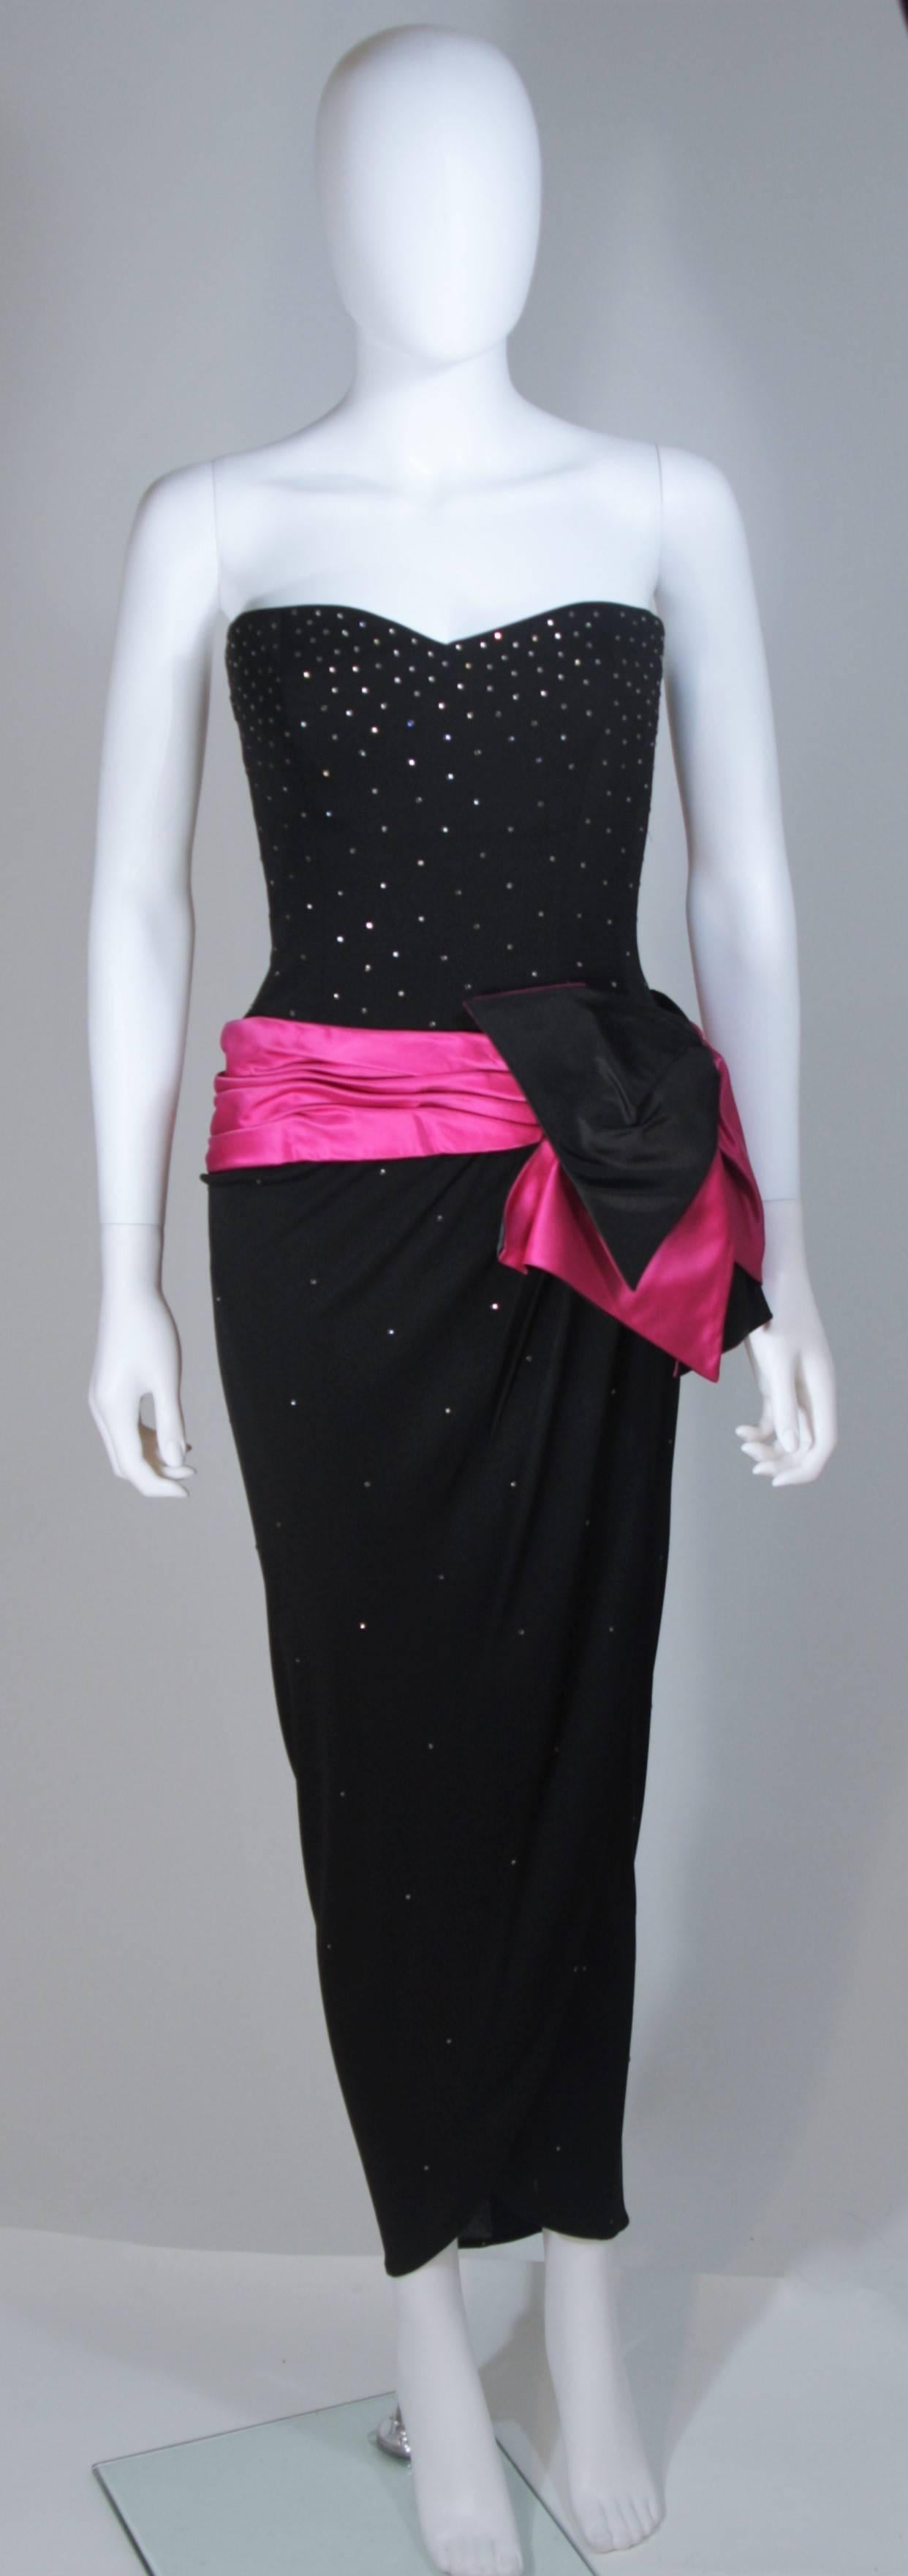  This Tracey Mills gown is composed of a black jersey and features a magenta/purple hue contrast at the waist which is accented by an asymmetrical drape skirt. The bodice is adorned with rhinestones. There is a center back zipper closure. In